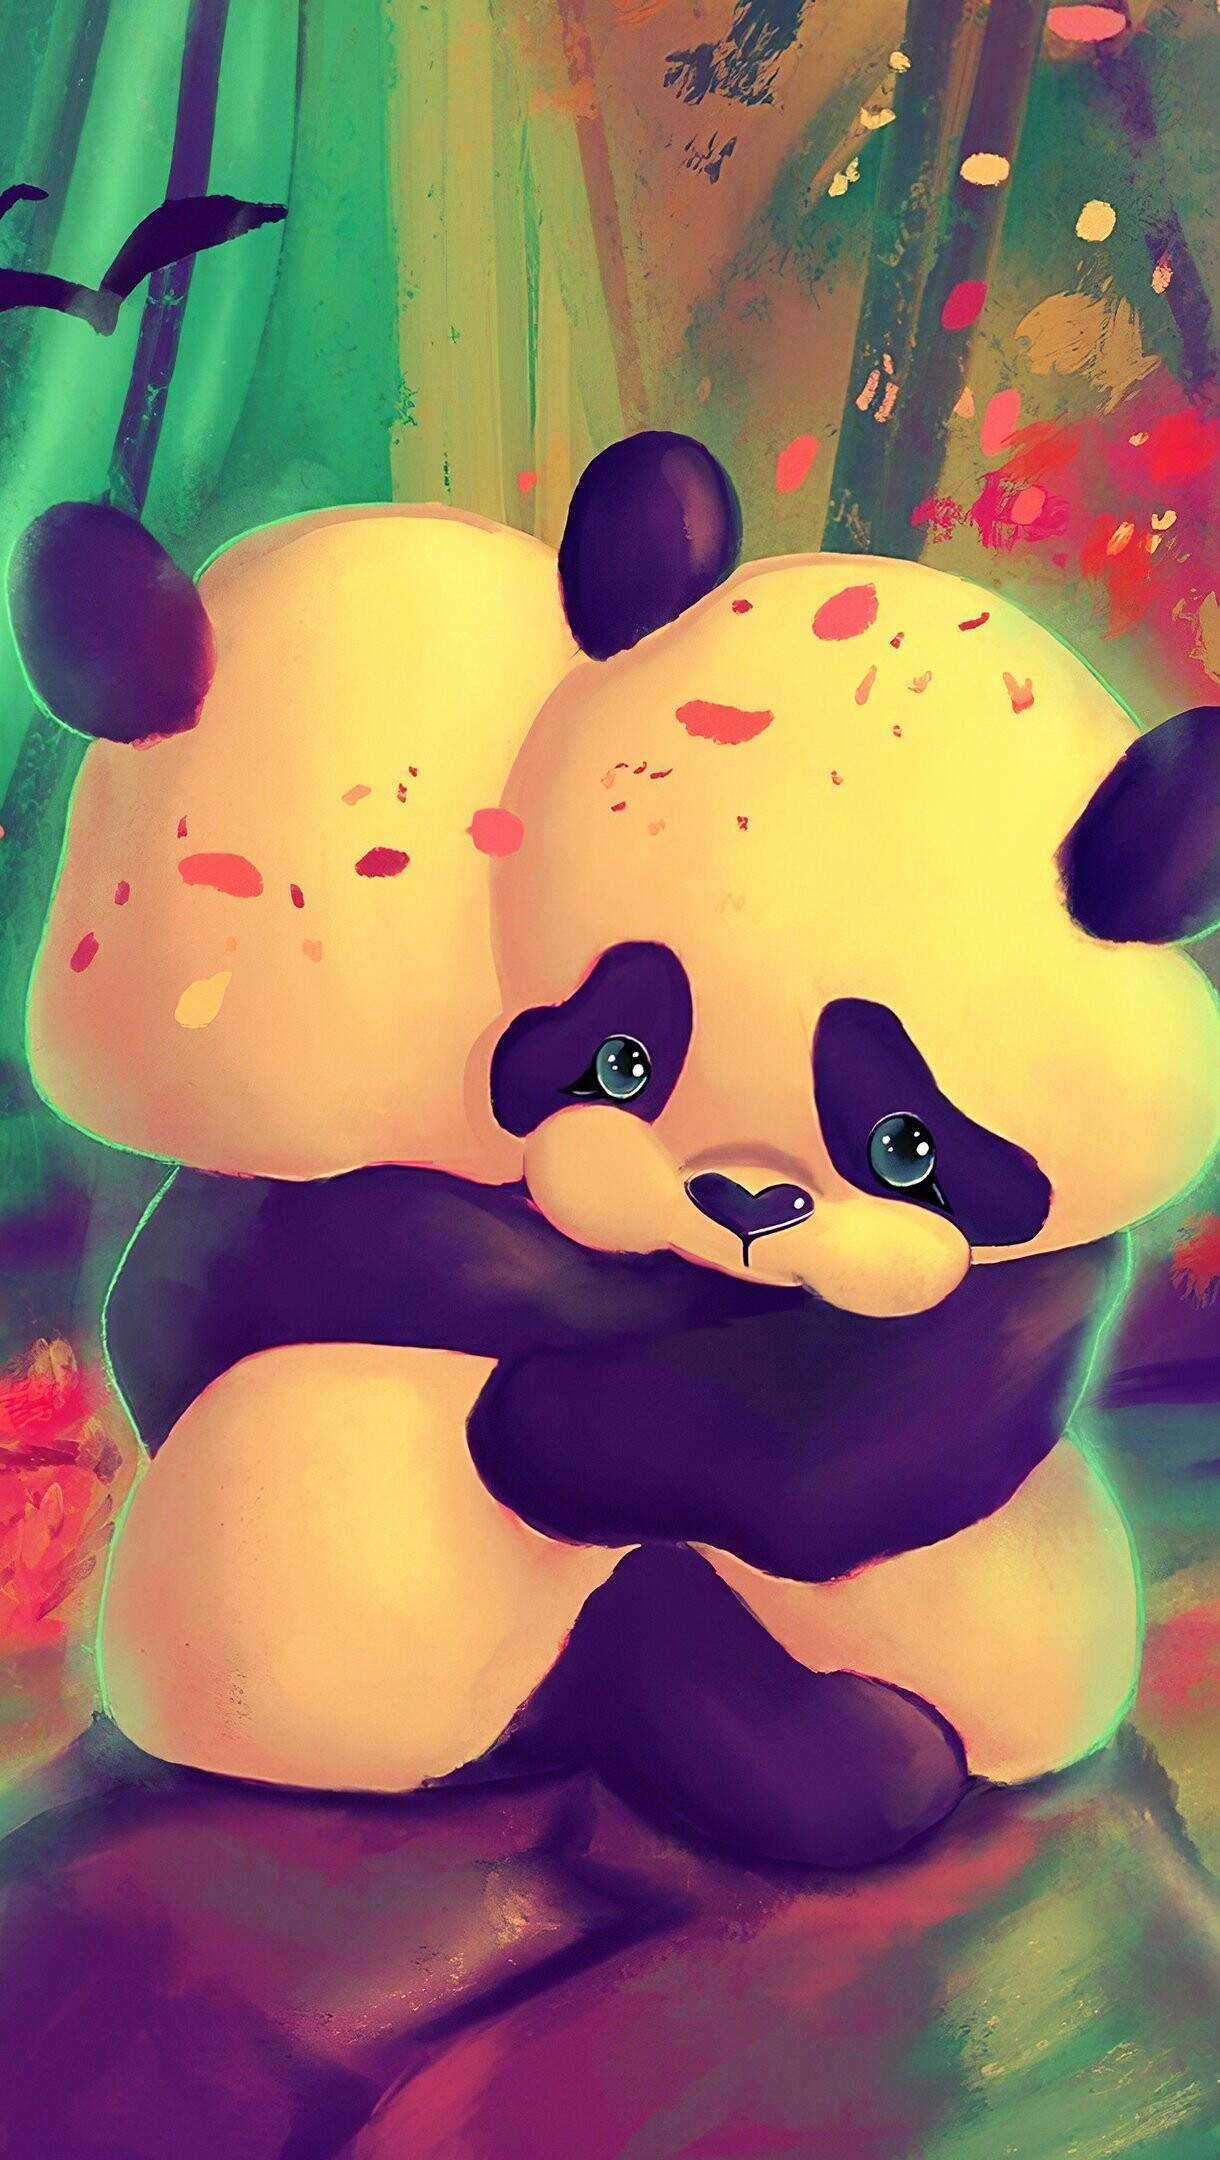 Panda: Bearlike mammals, Found in thick bamboo forests. 1220x2160 HD Wallpaper.